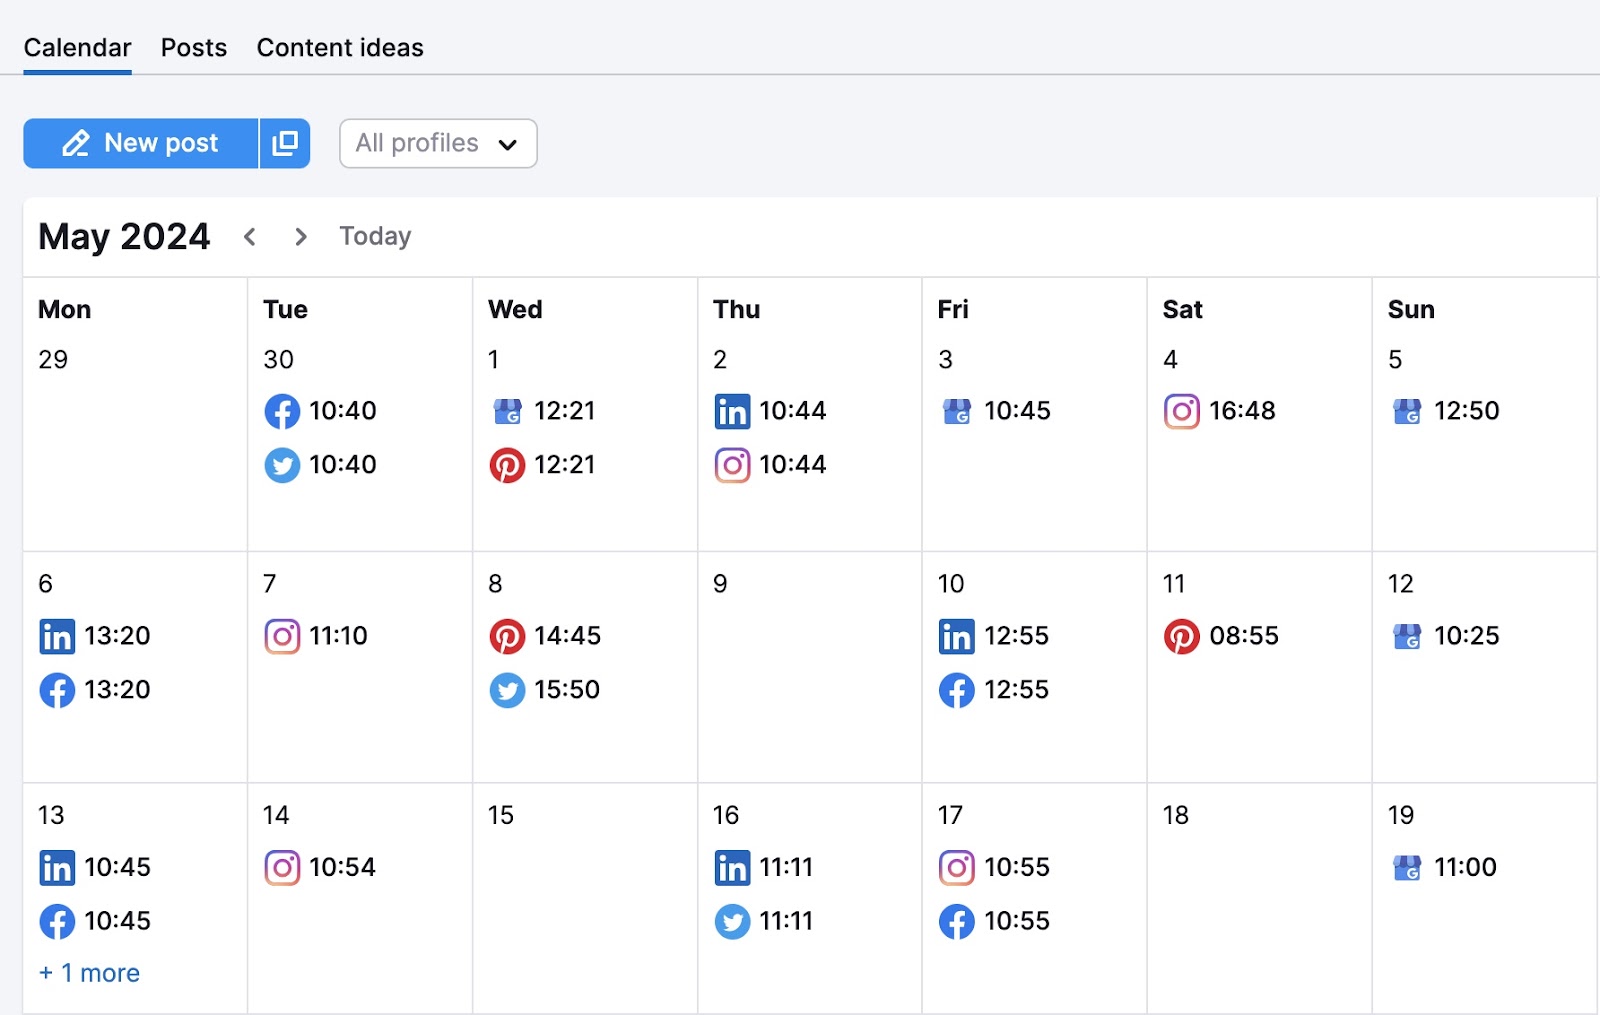 Calendar view on Social Poster with multiple posts scheduled across platforms like Facebook, Instagram, X, LinkedIn, etc.